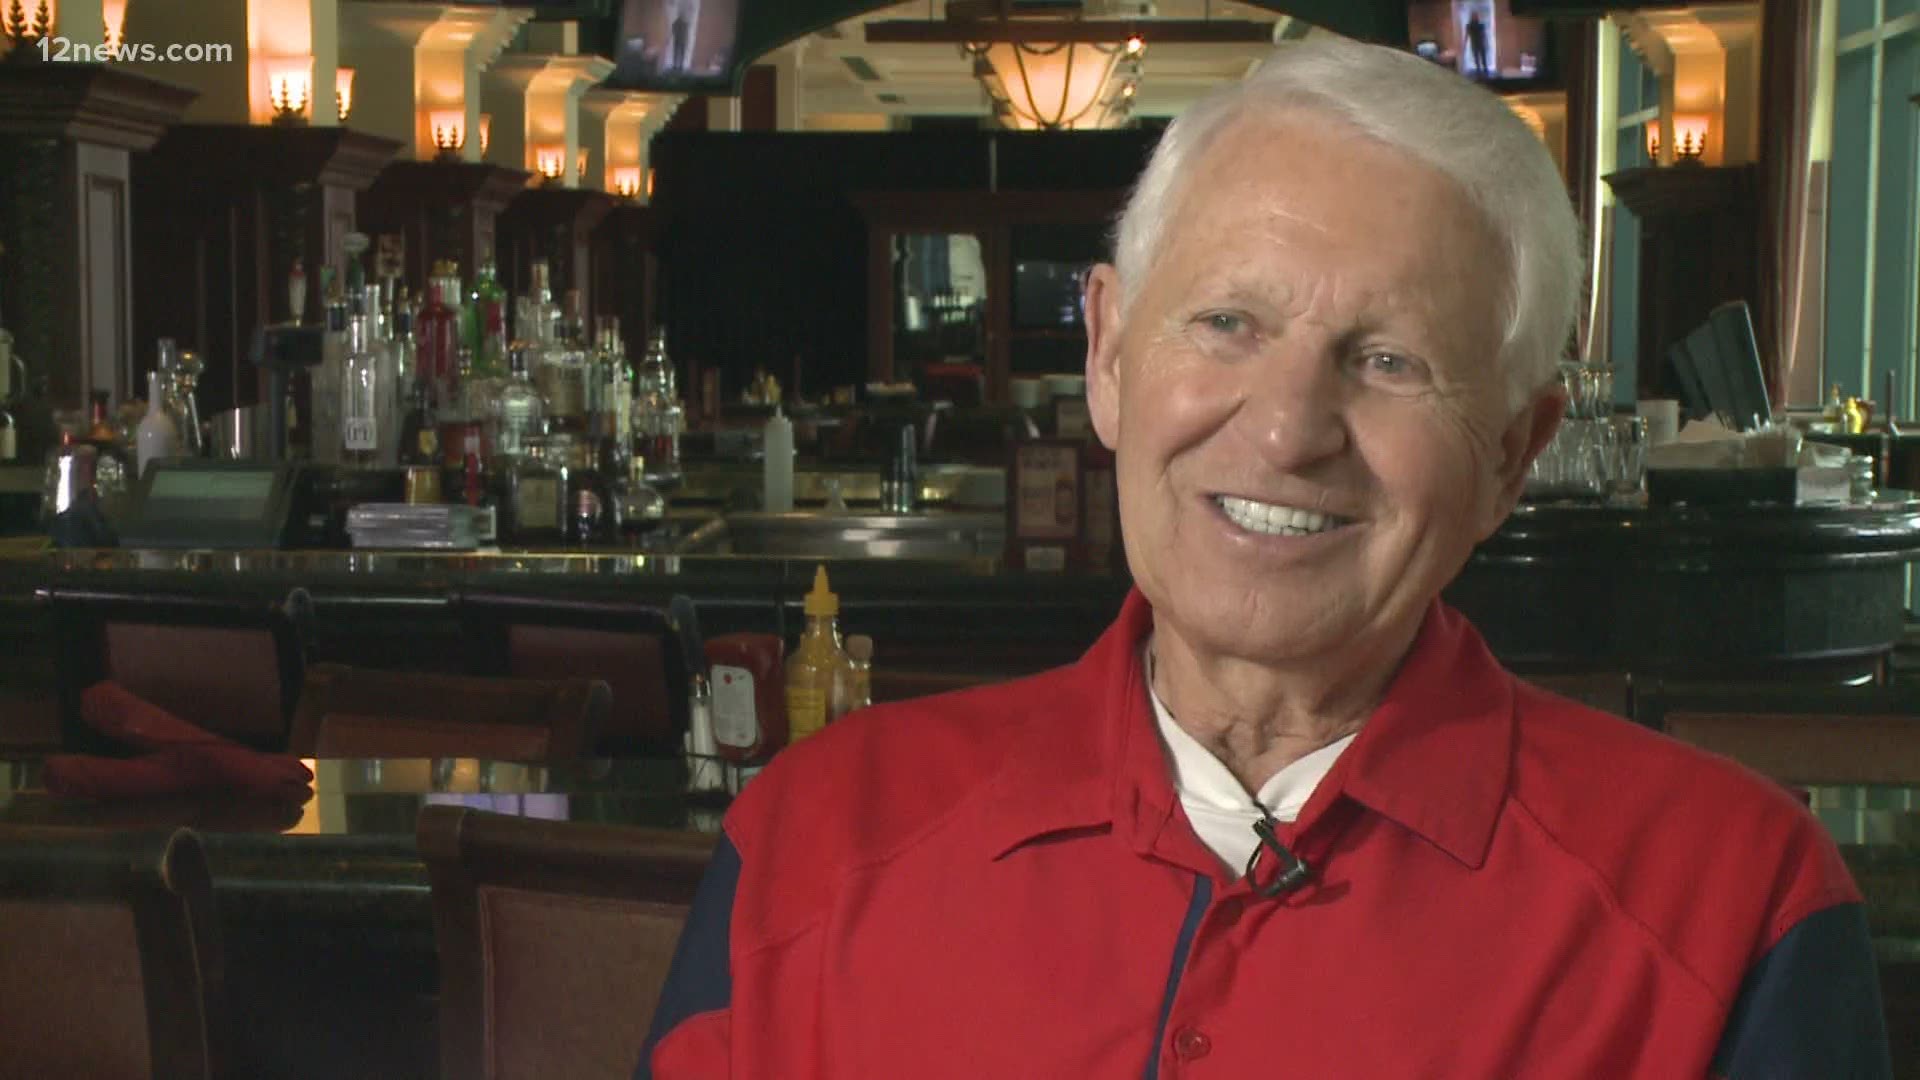 The University of Arizona Hall of Fame basketball coach has passed away. He was 85.